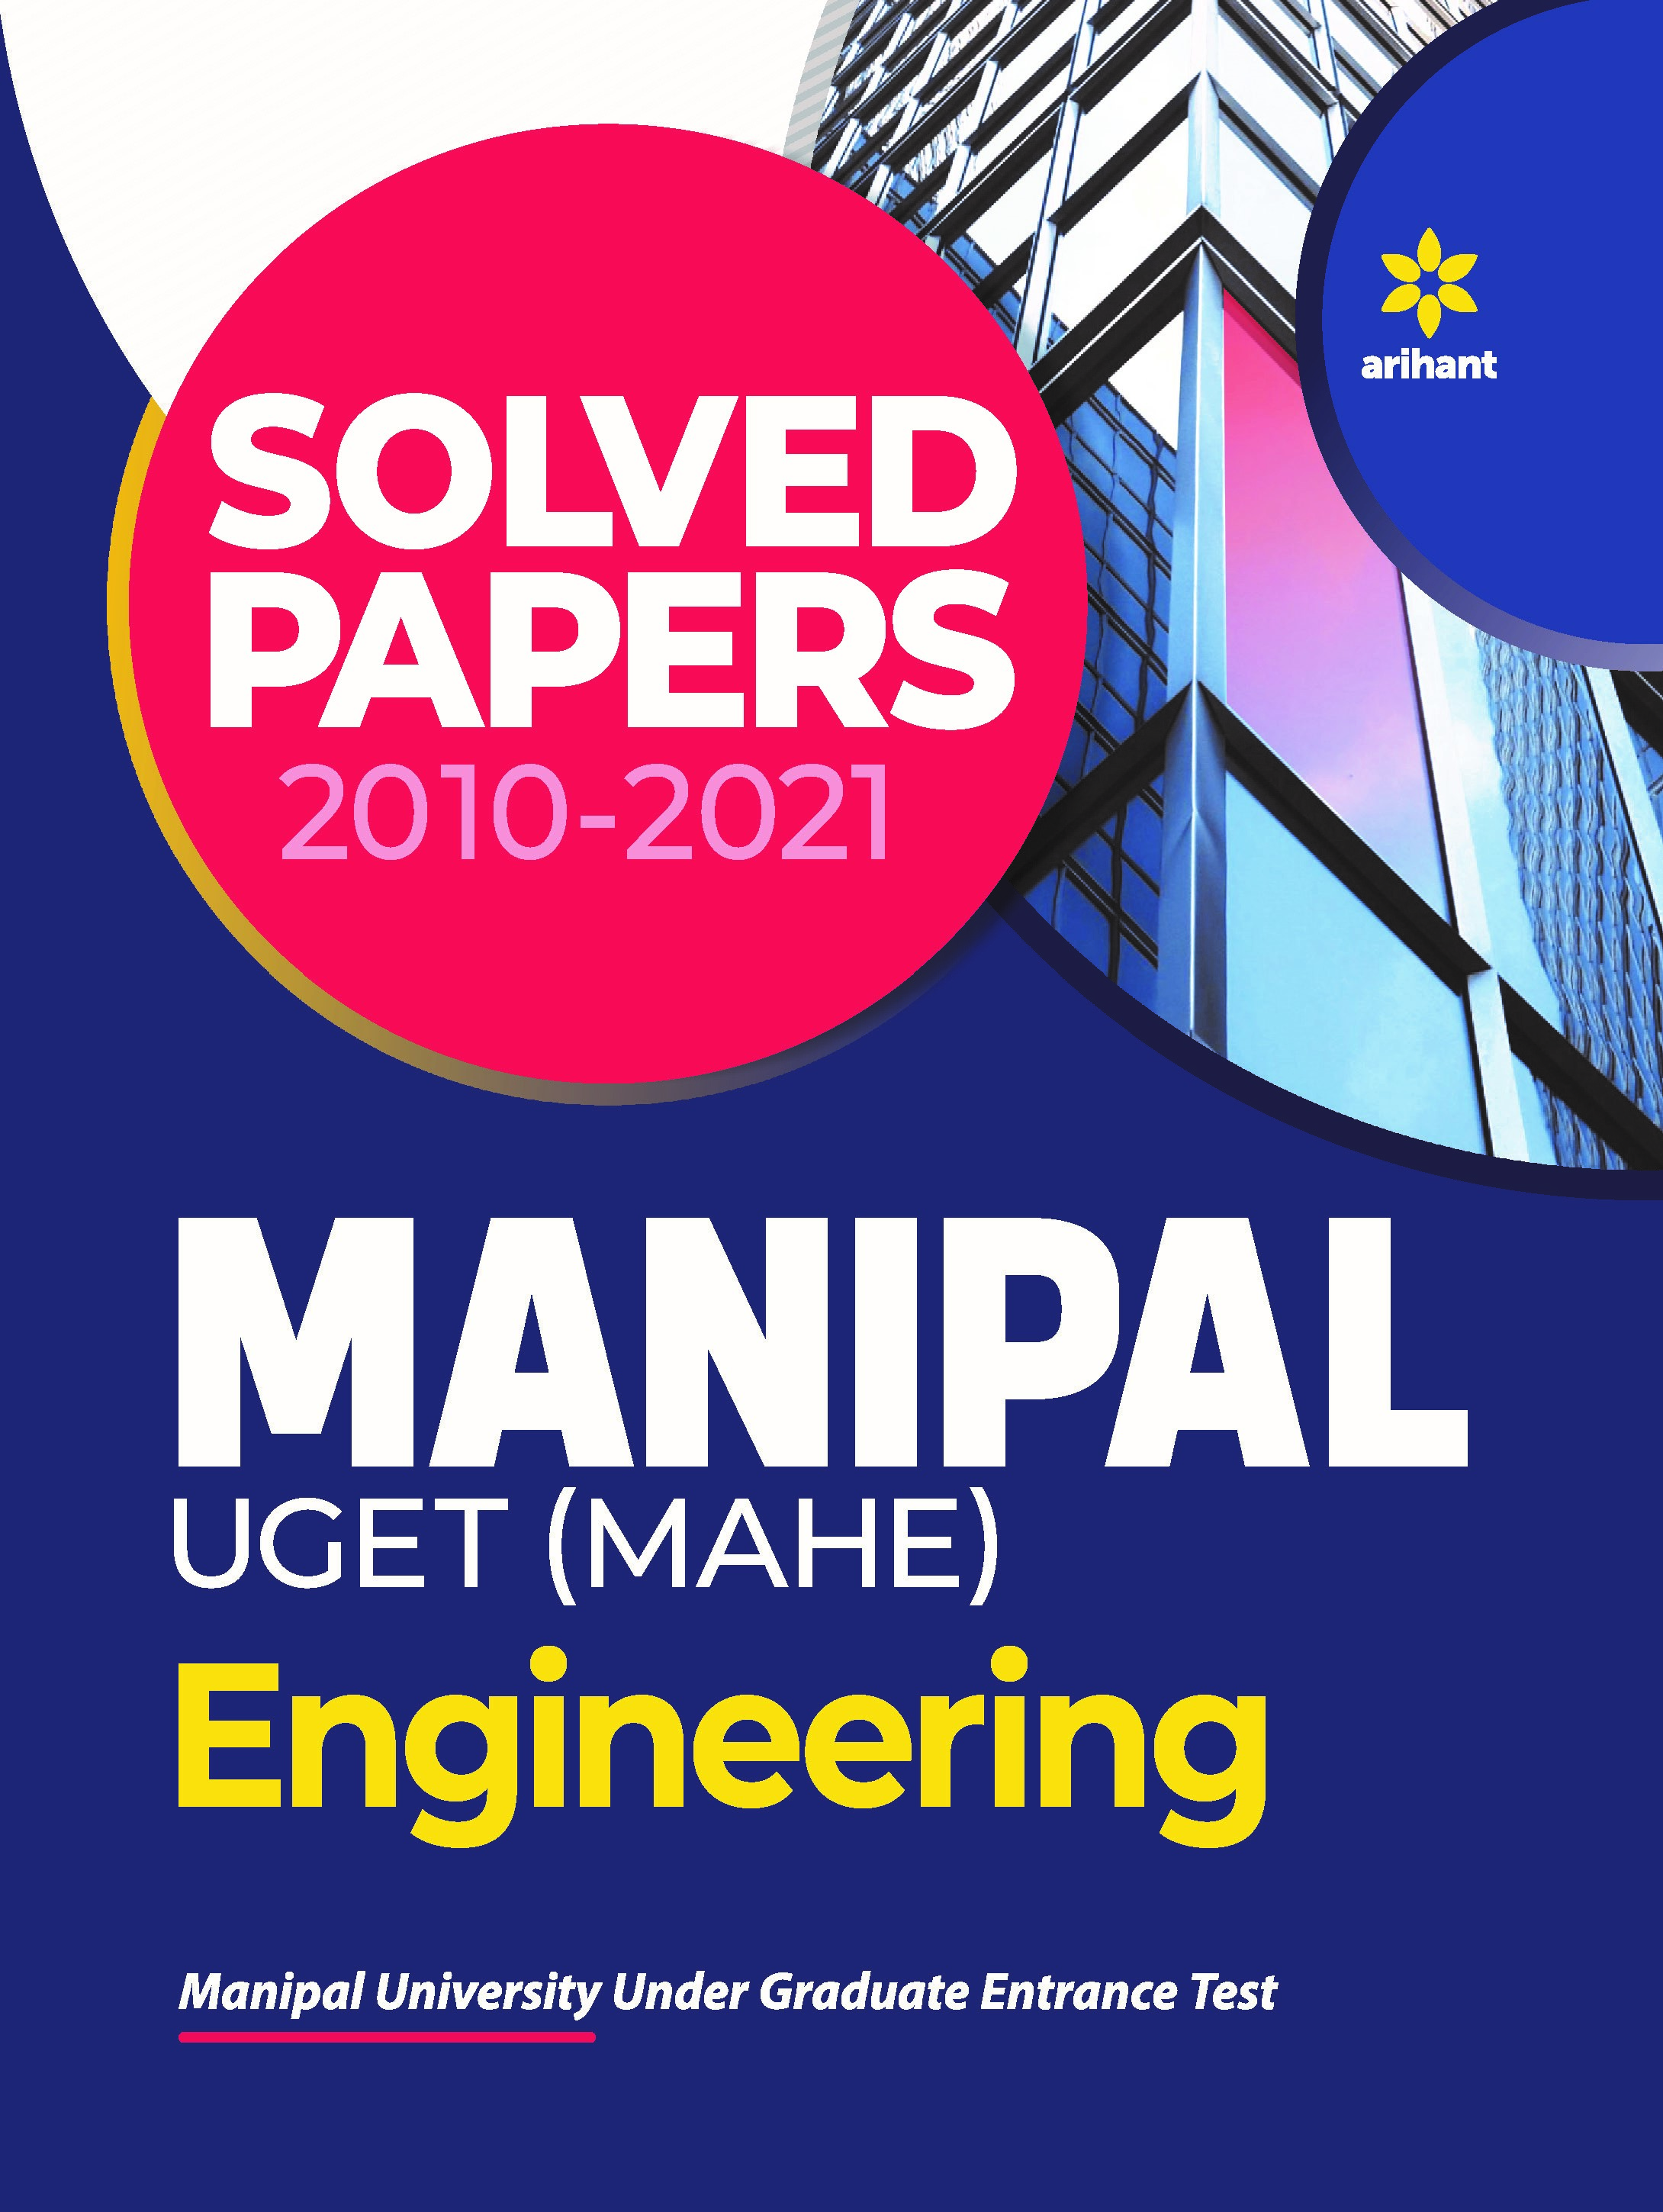 Solved Papers for Manipal Engineering 2022